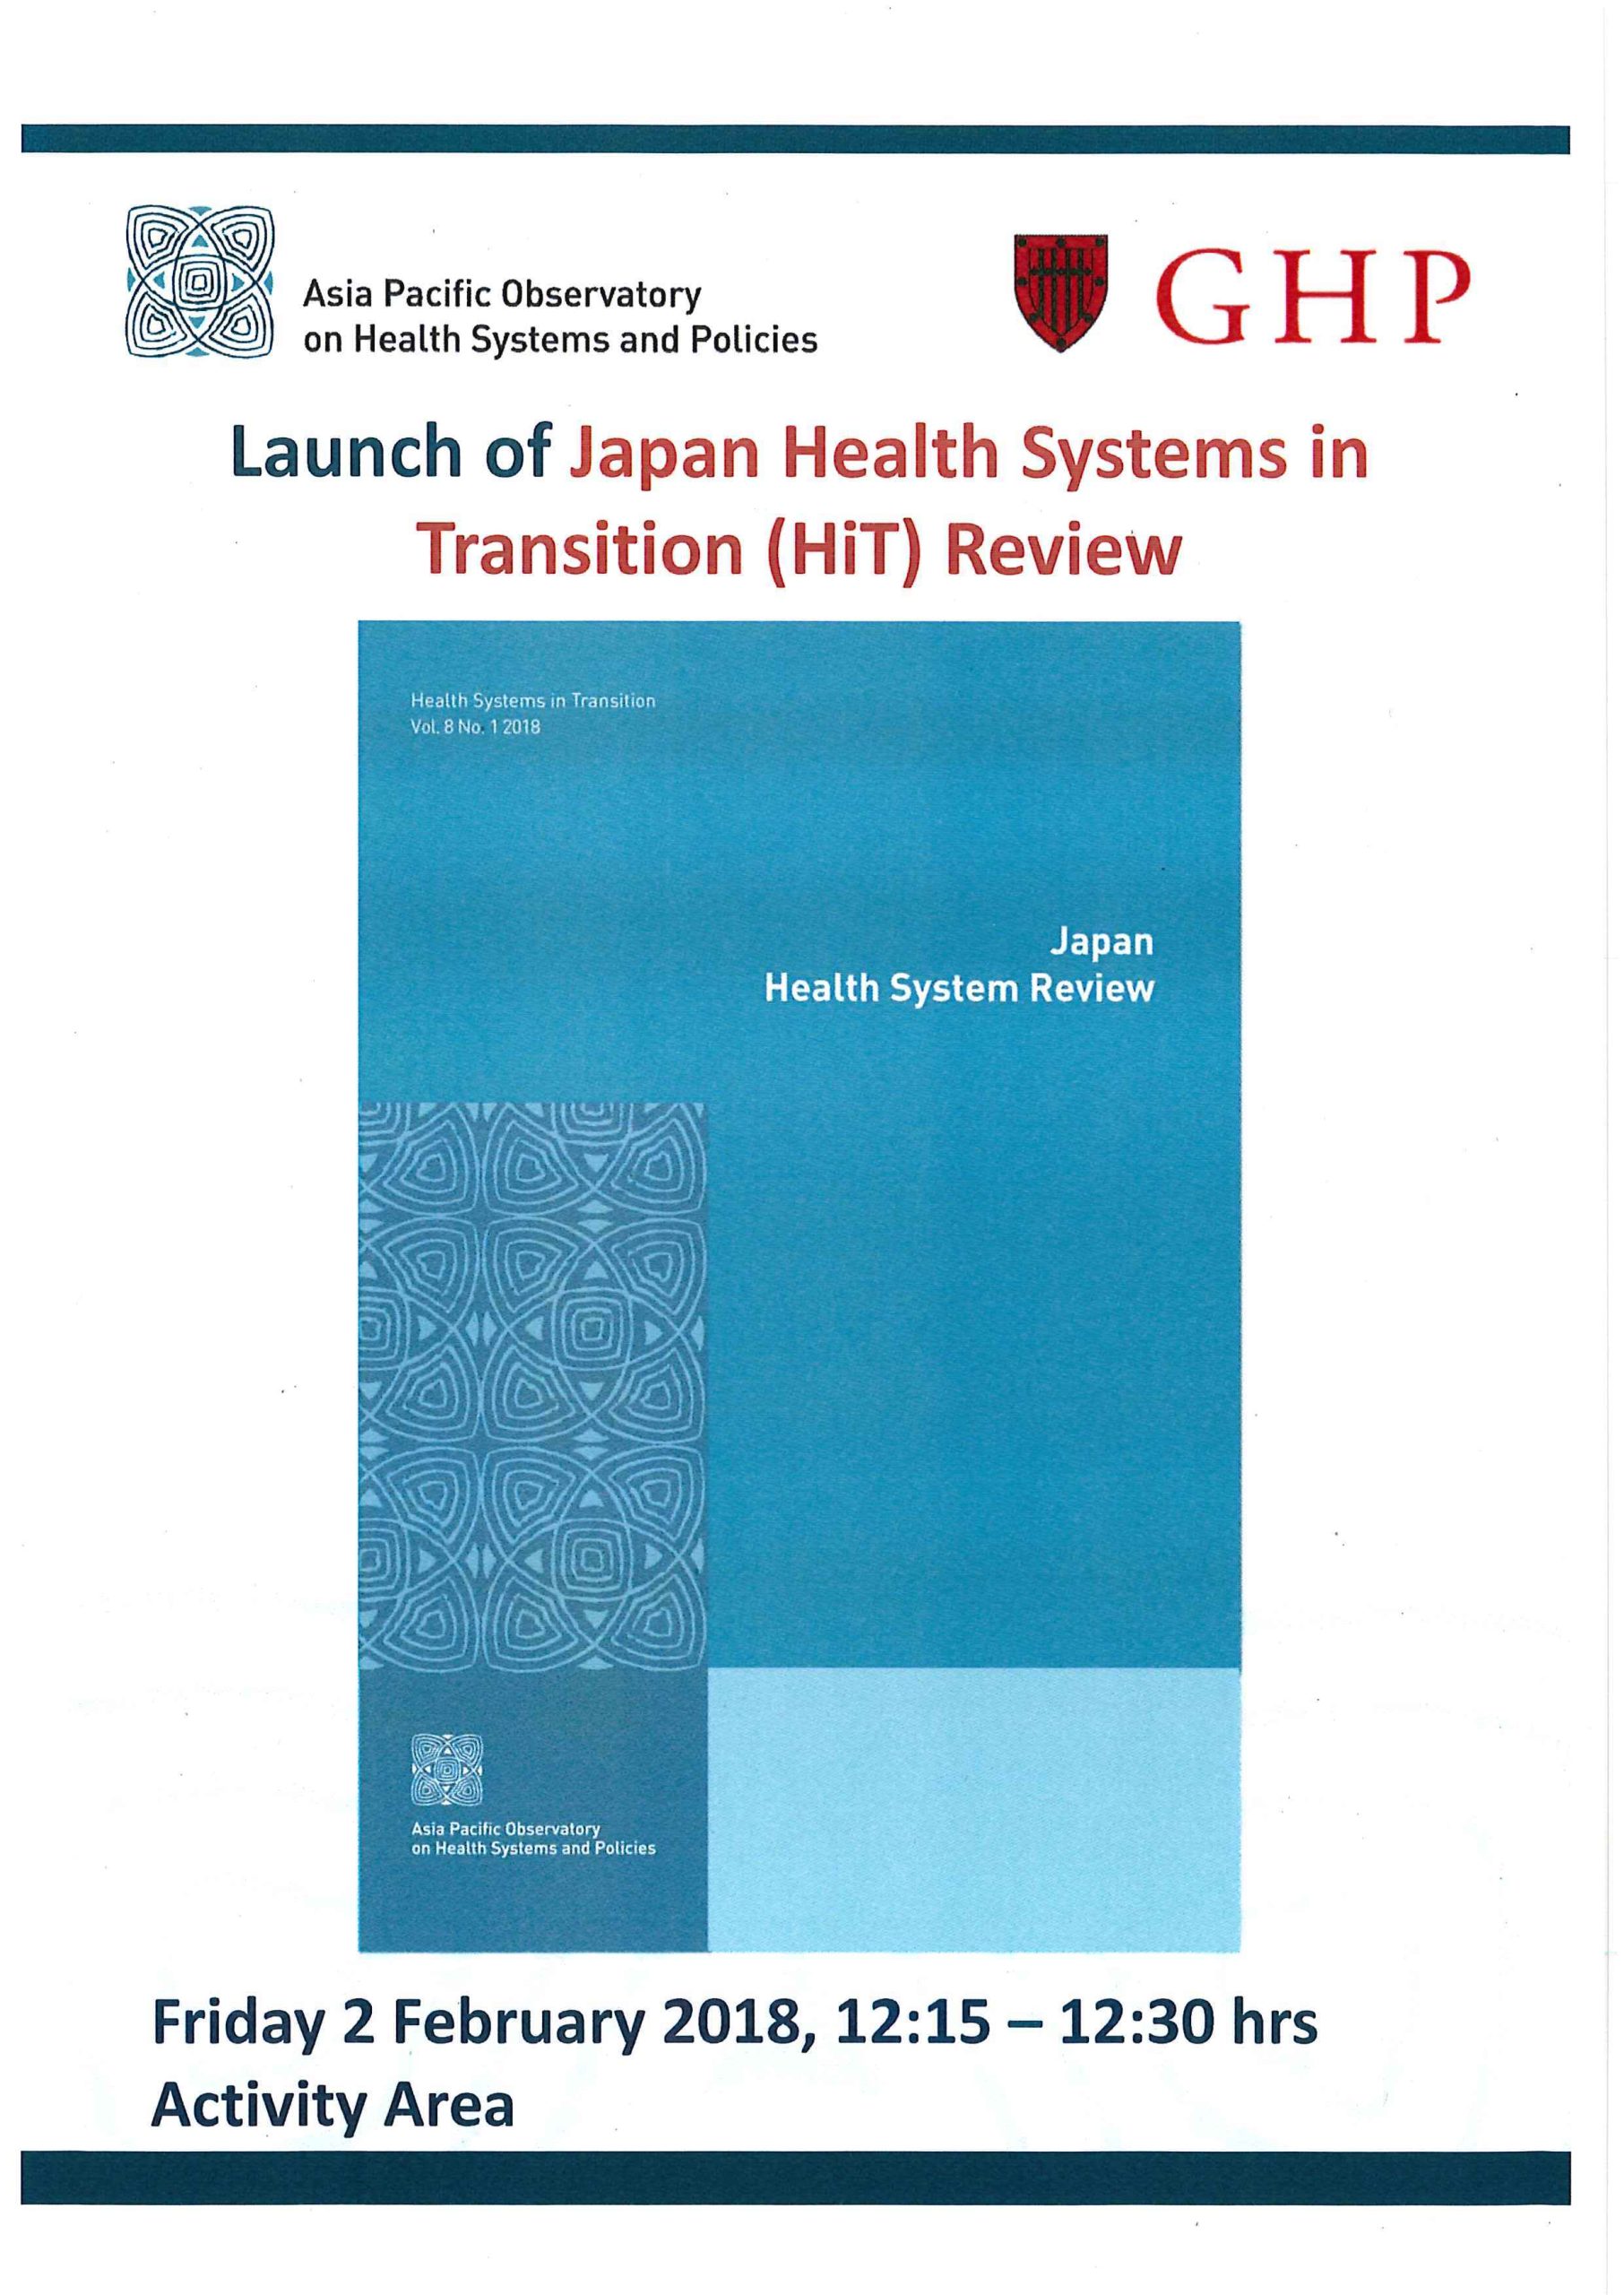 Lanzamiento de Japan Health Systems in Transition (HiT) Review @ PMAC 2018